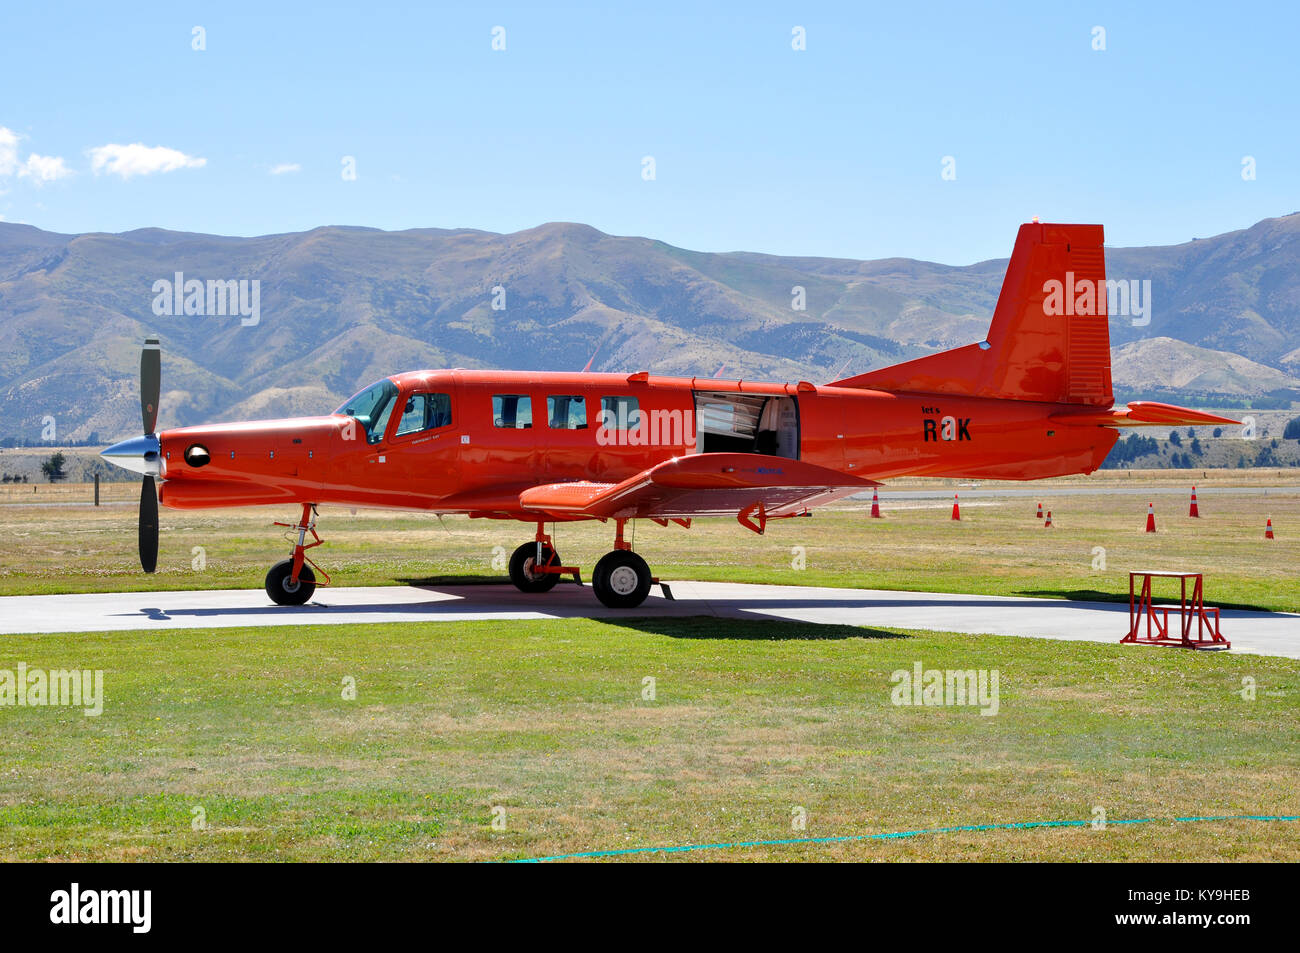 Pacific Aerospace 750XL ZK-ROK turboprop plane used for parachute jumping by Skydive Wanaka at Wanaka Airport, Otago, New Zealand Stock Photo